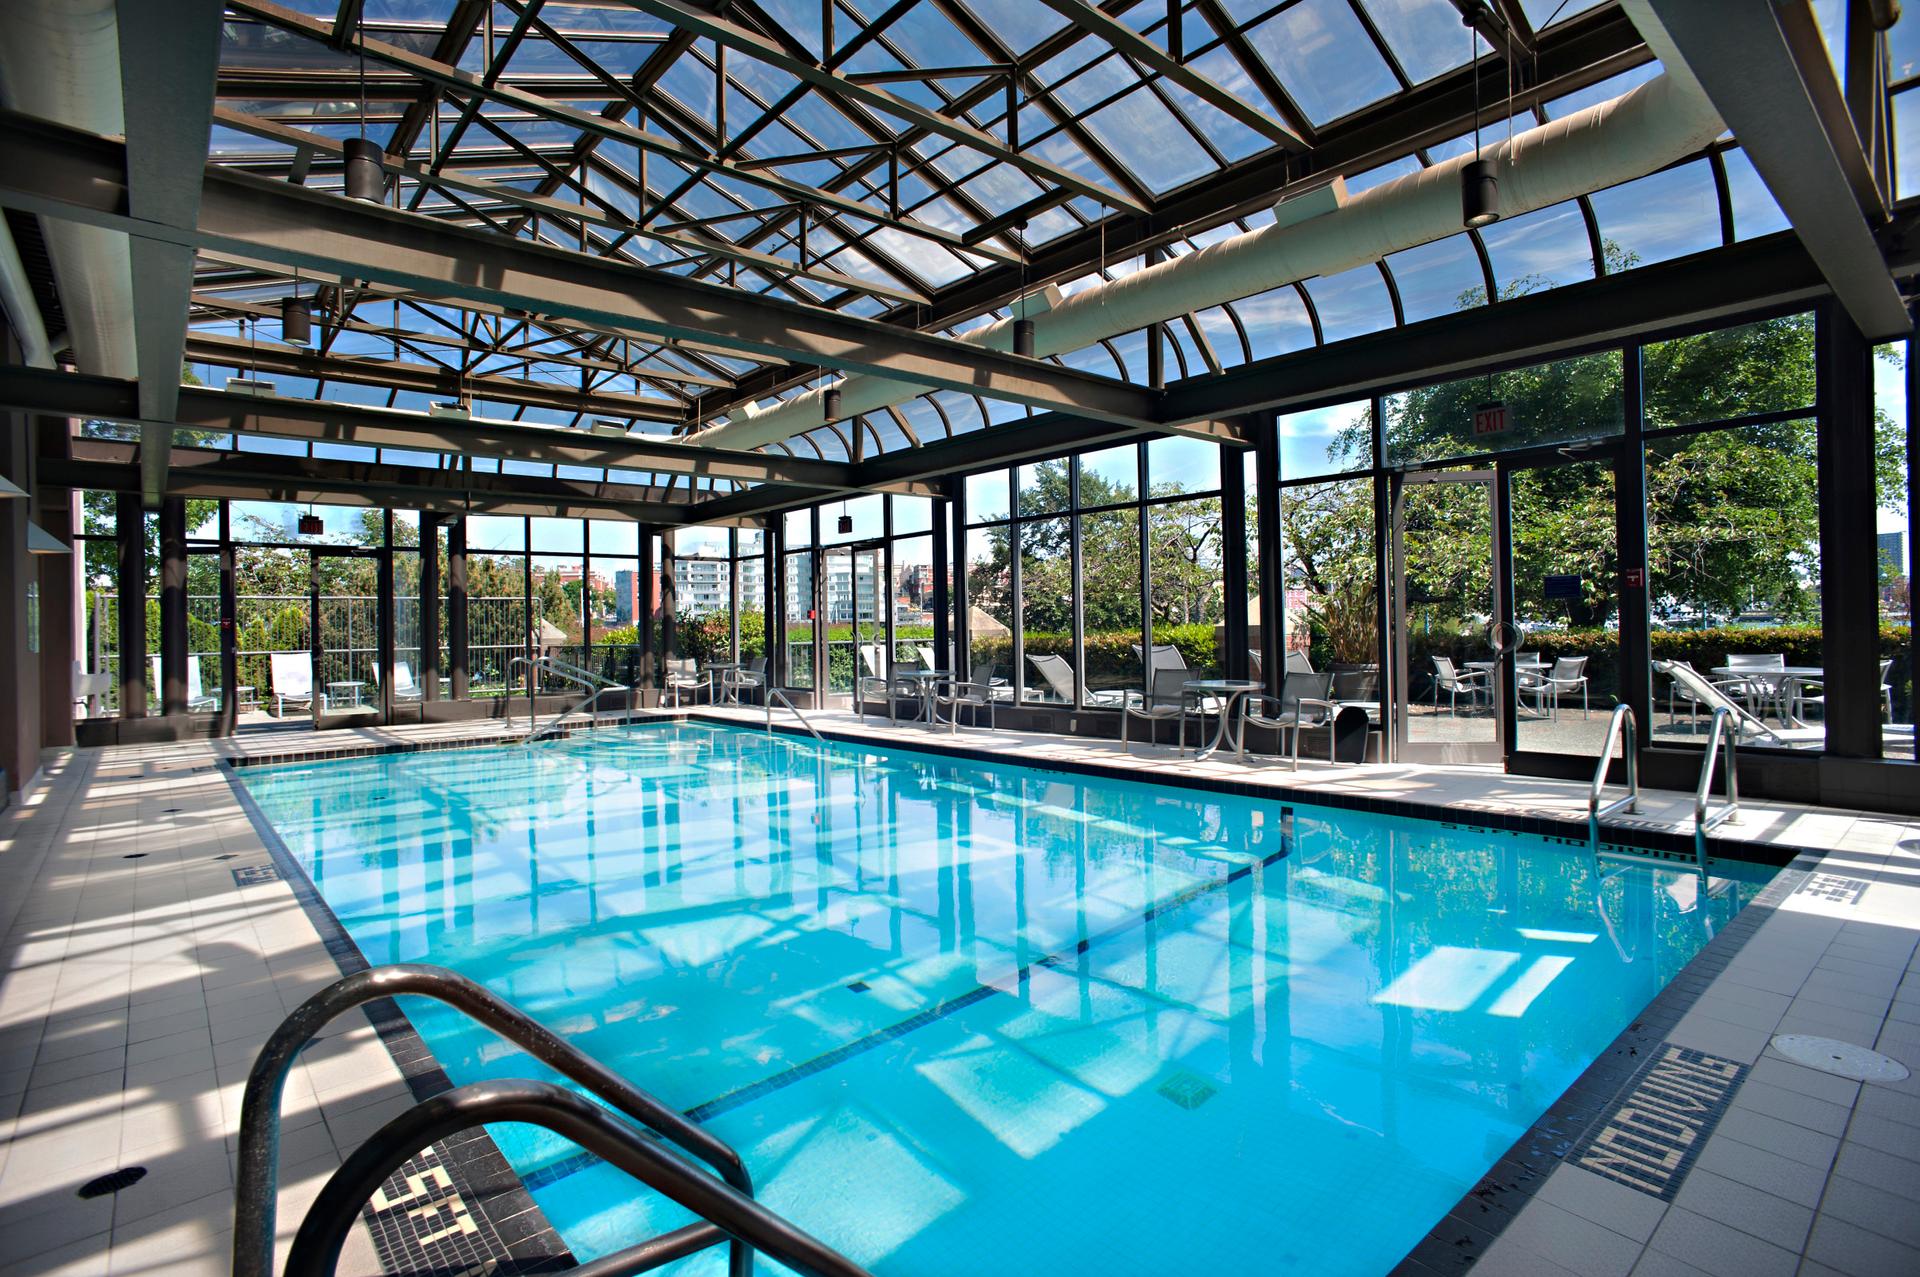 Enjoy our fabulous indoor heated salt water pool and private outdoor patio.